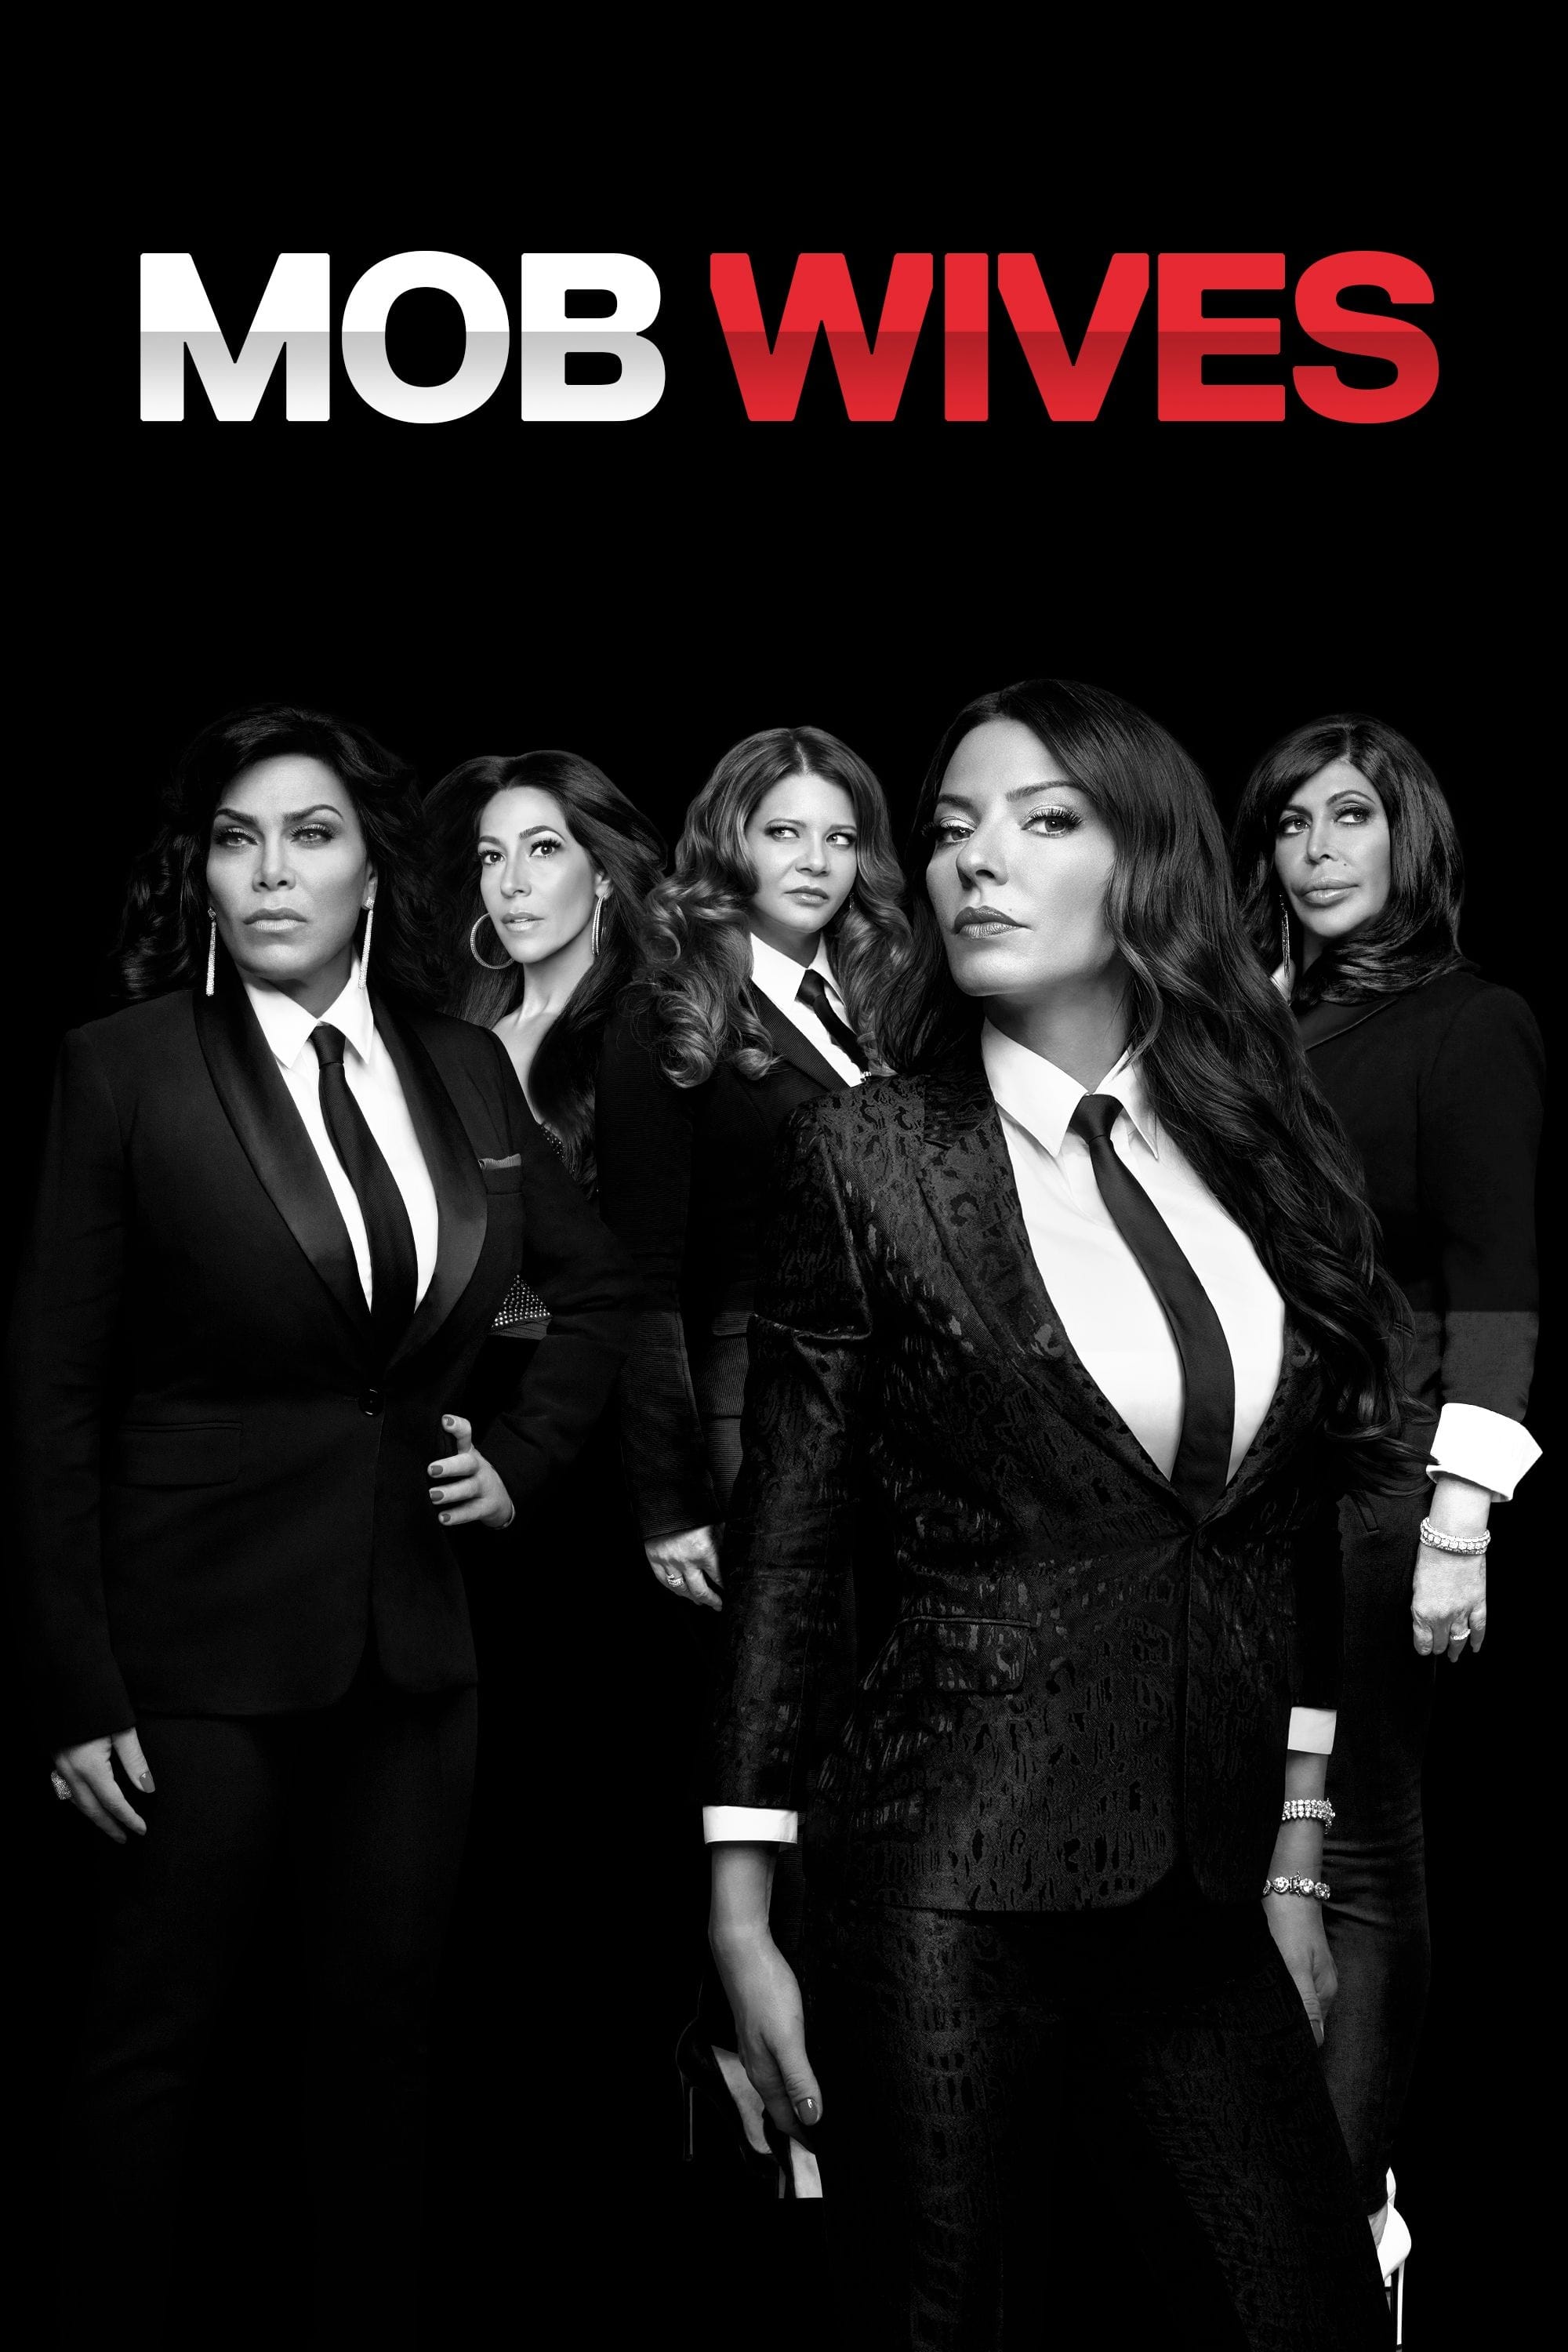 Season 7 of Mob Wives Won't Be on VH1's Schedule